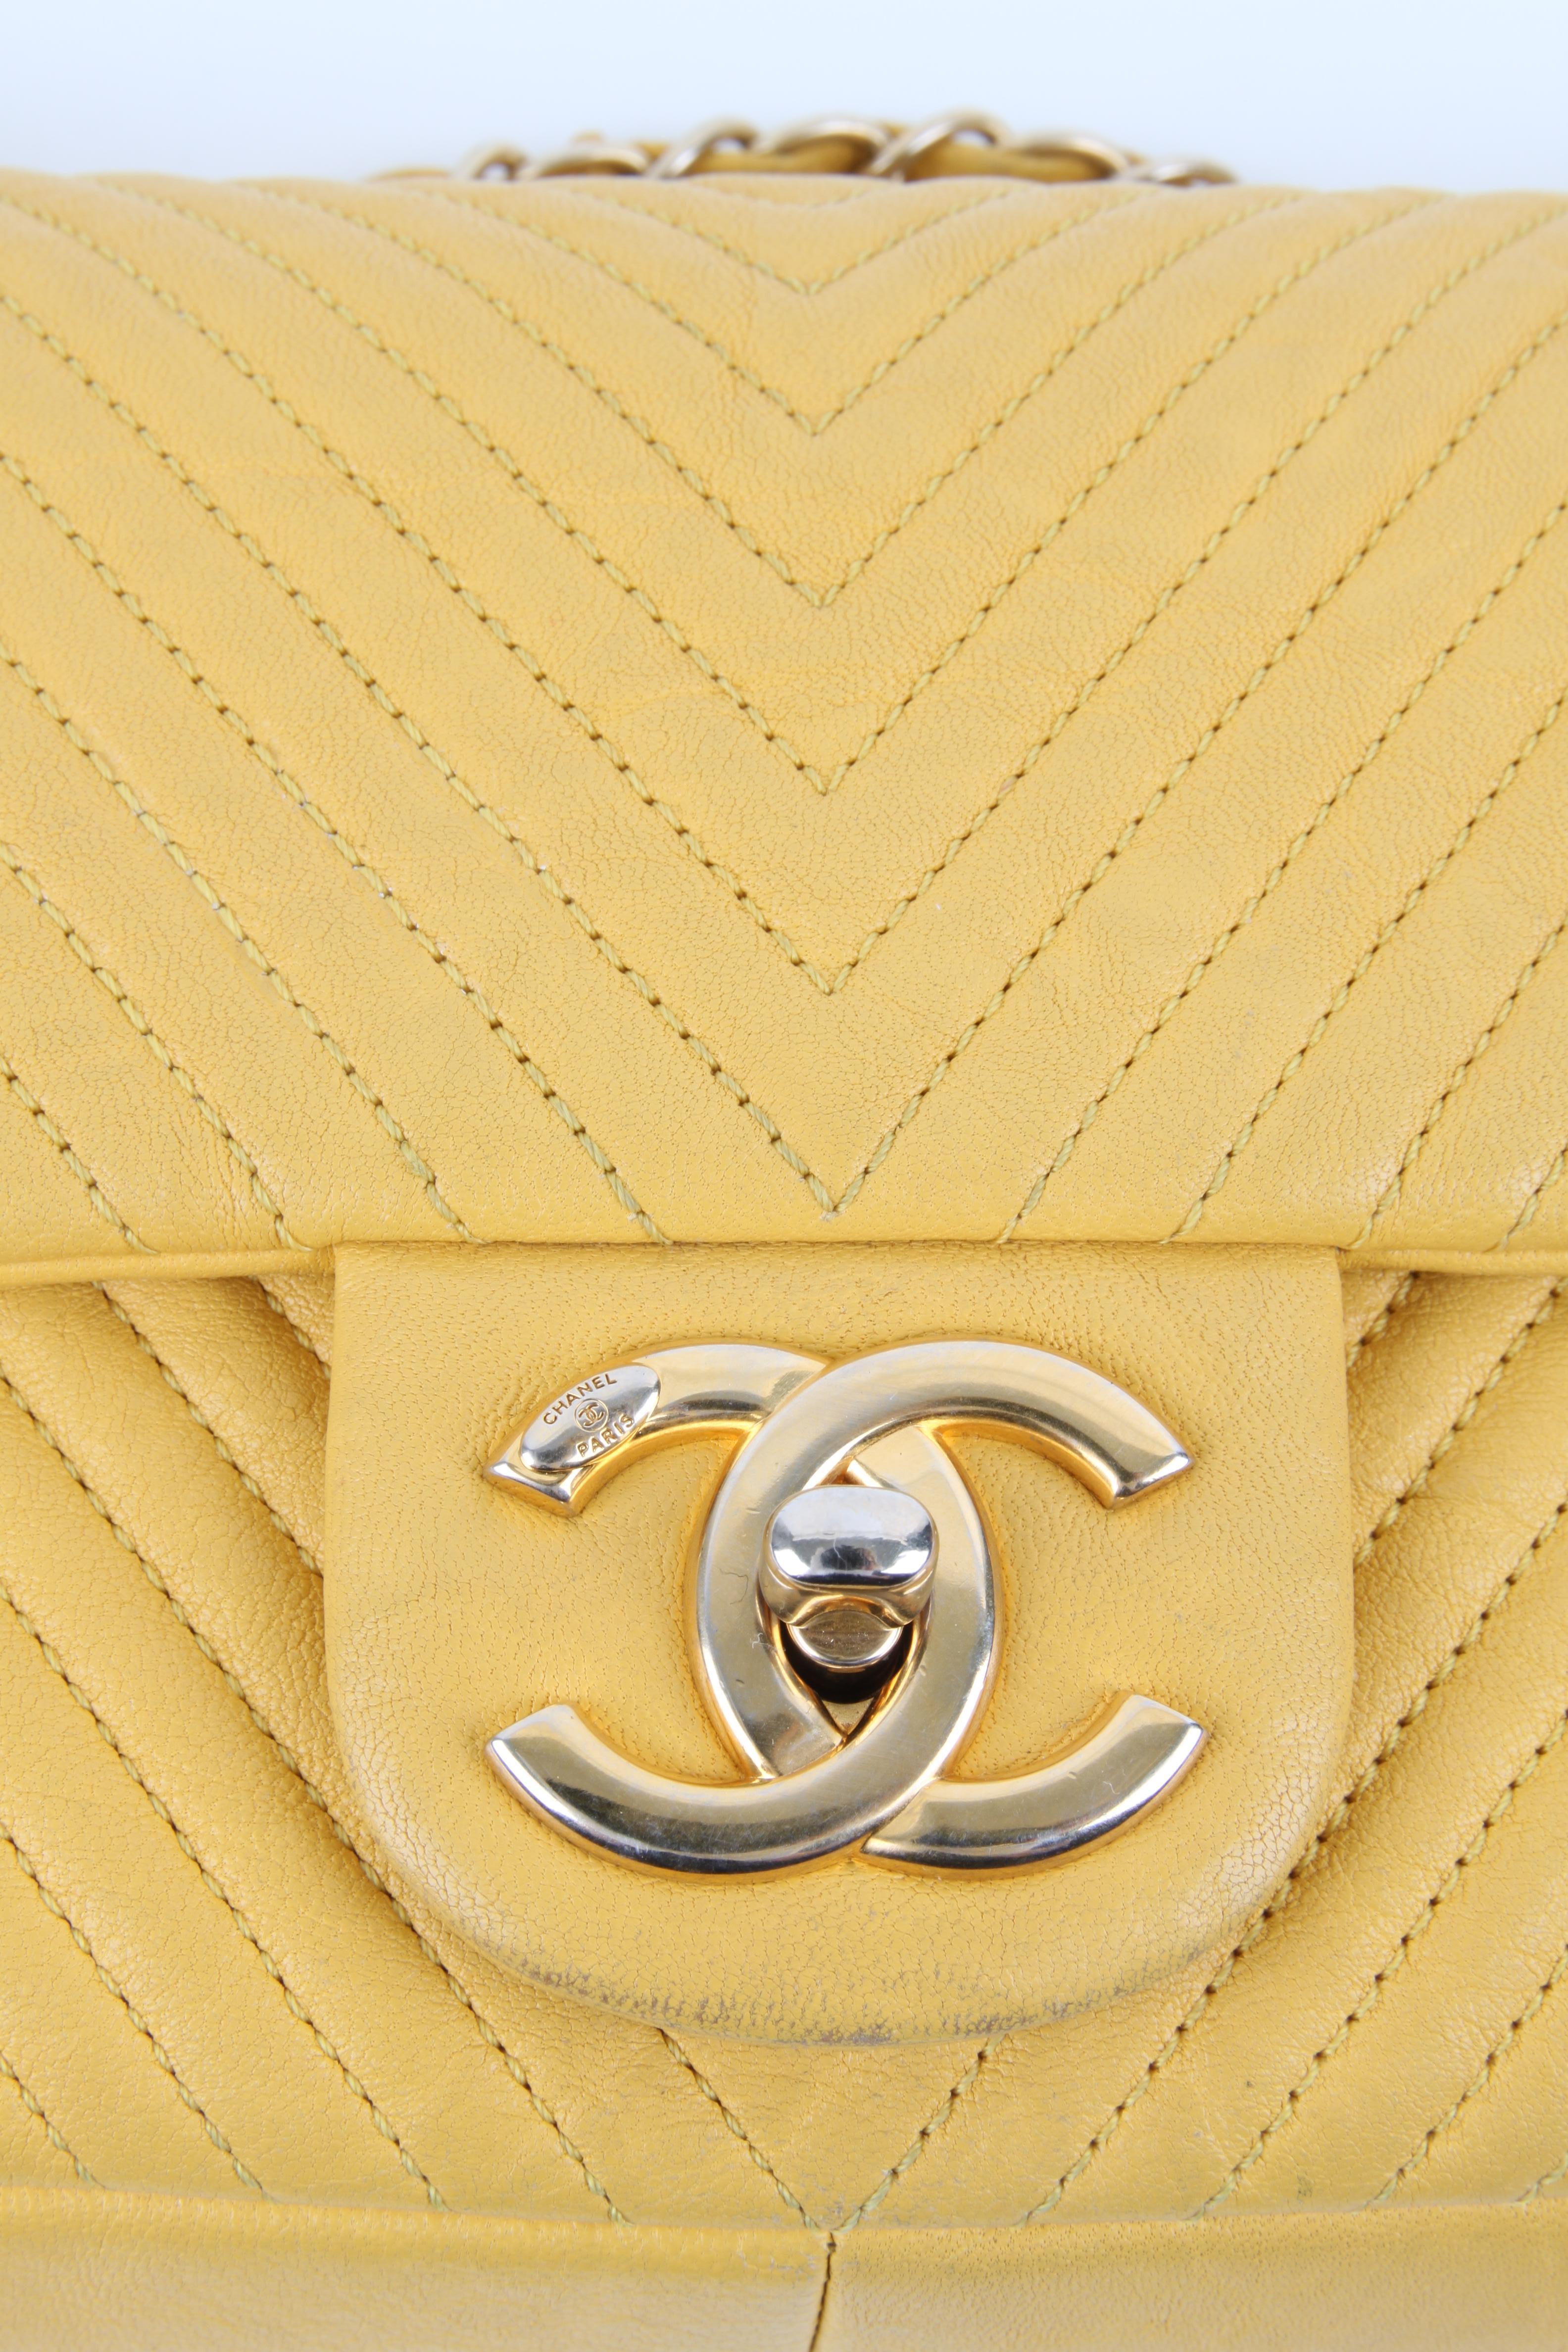 Chanel Chevron Quilted Rectangular Flap Bag - yellow 3